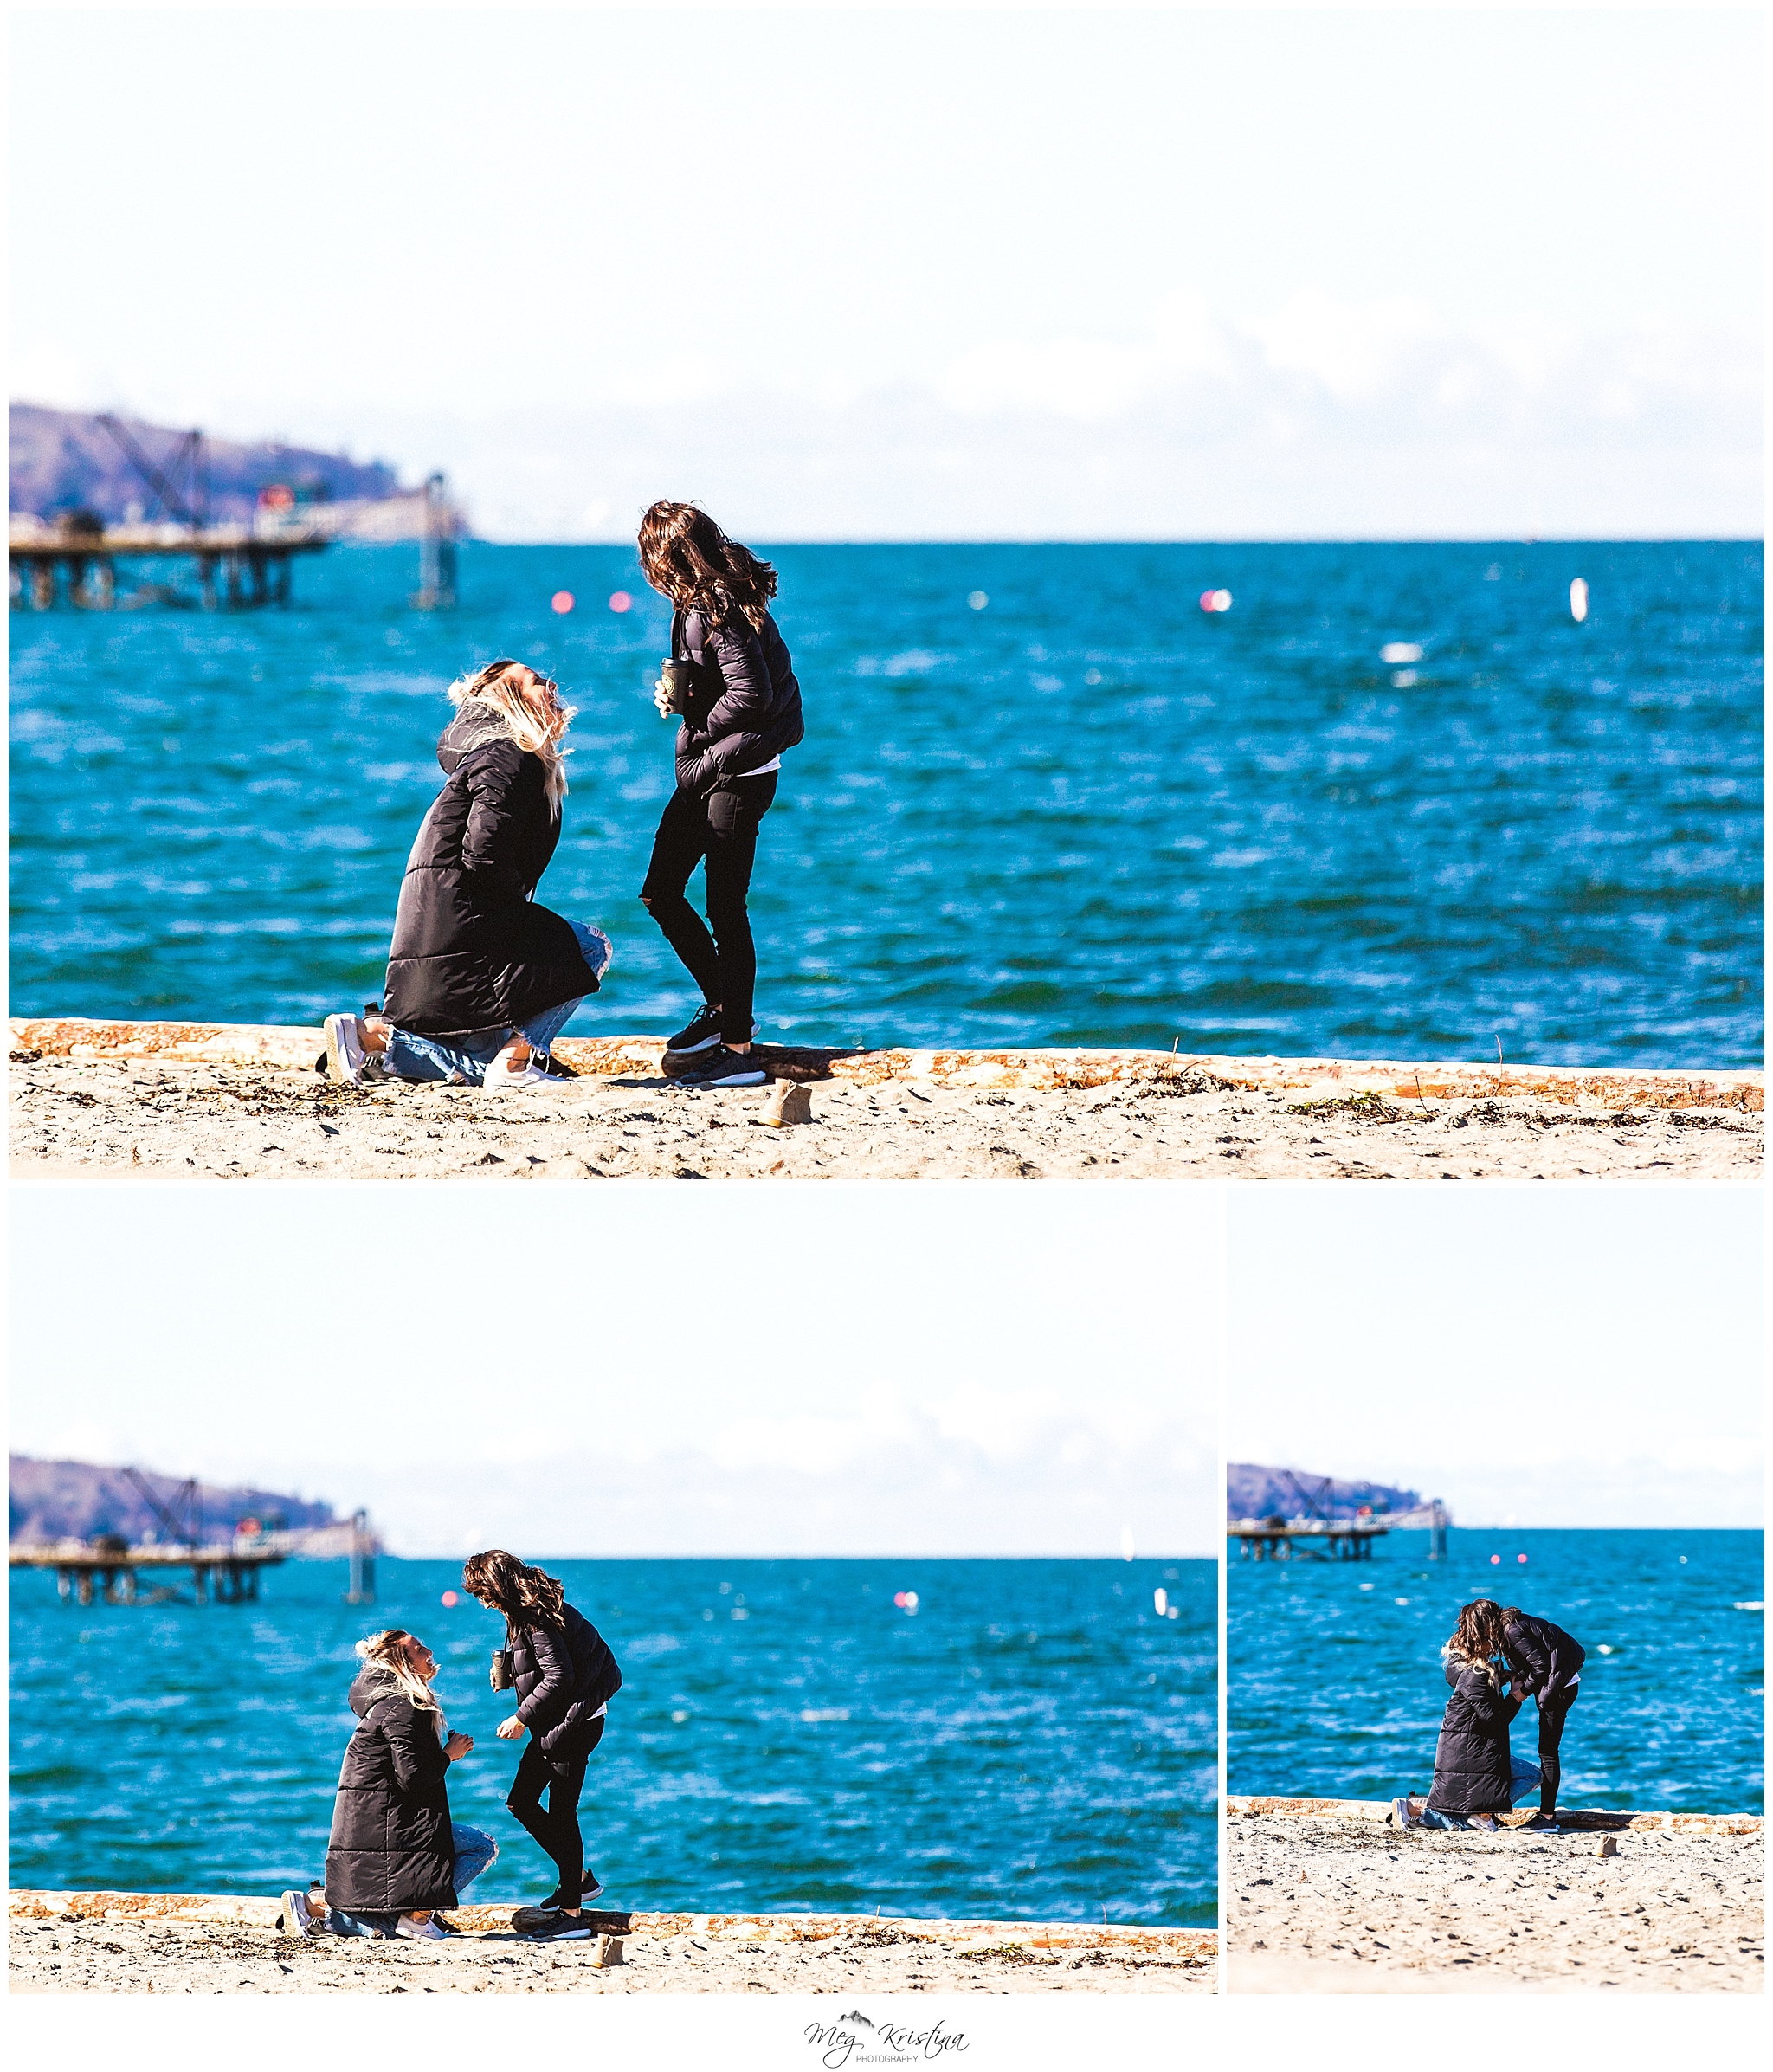 getting down on one knee to propose to her partner of 4 years on Kitsilano beach during a proposal shoot